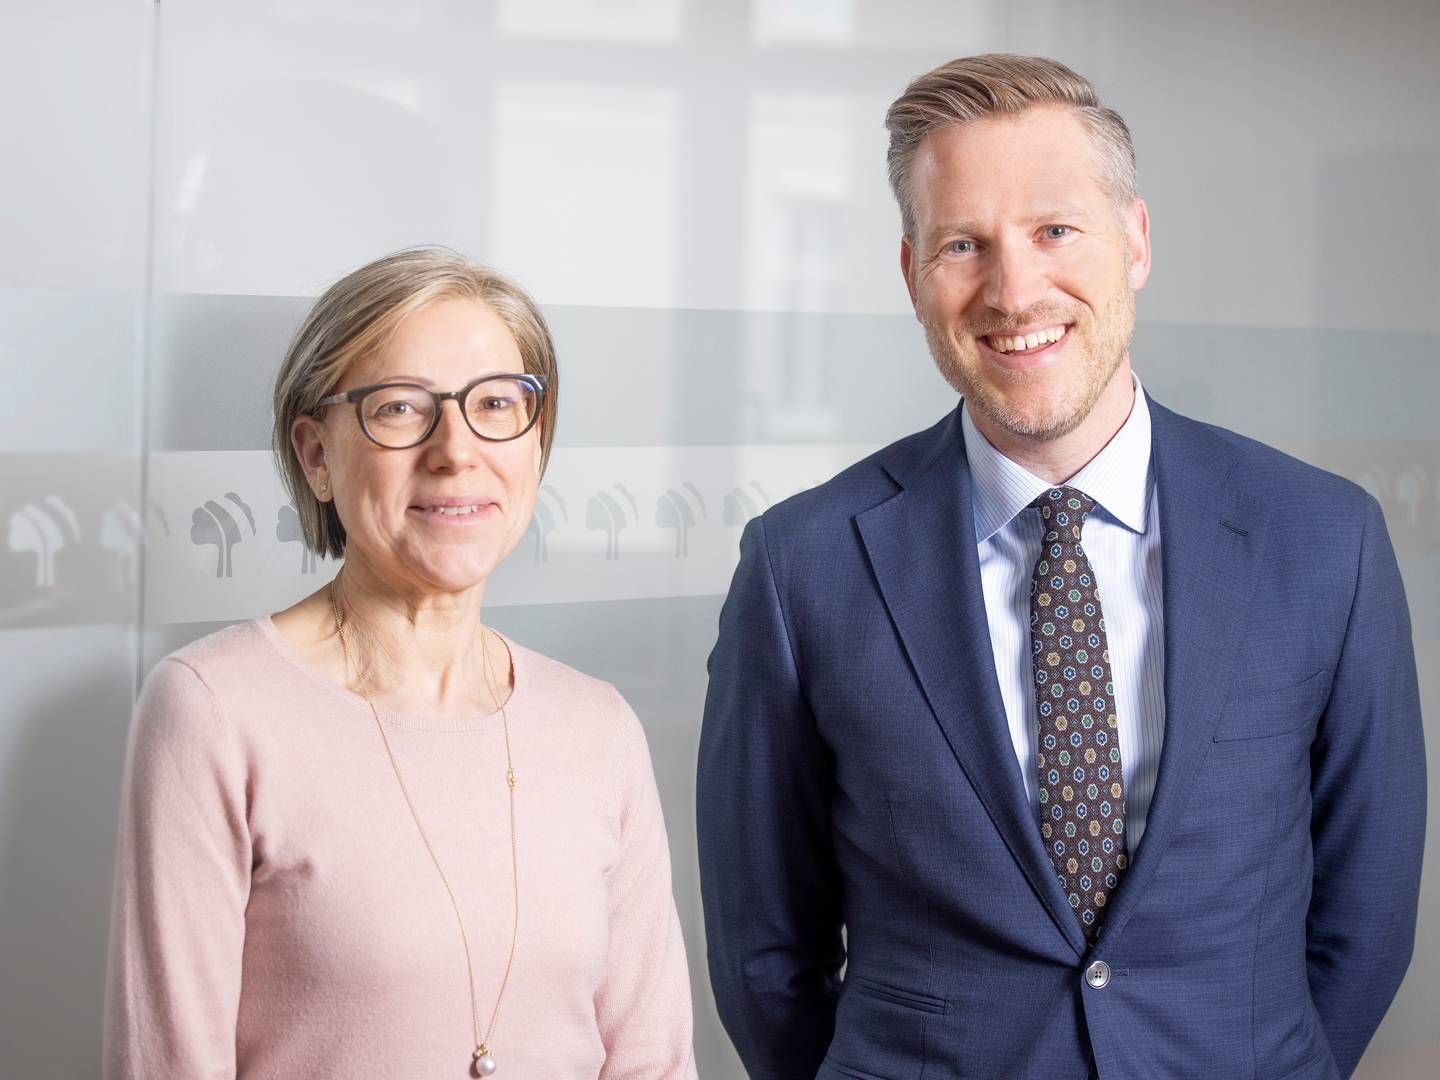 Lene Boserup, Senior Portfolio Manager at Industriens Pension, and Anders Madsen, Head of Institutional Distribution at Nordea Asset Management. | Photo: PR/Industriens Pension